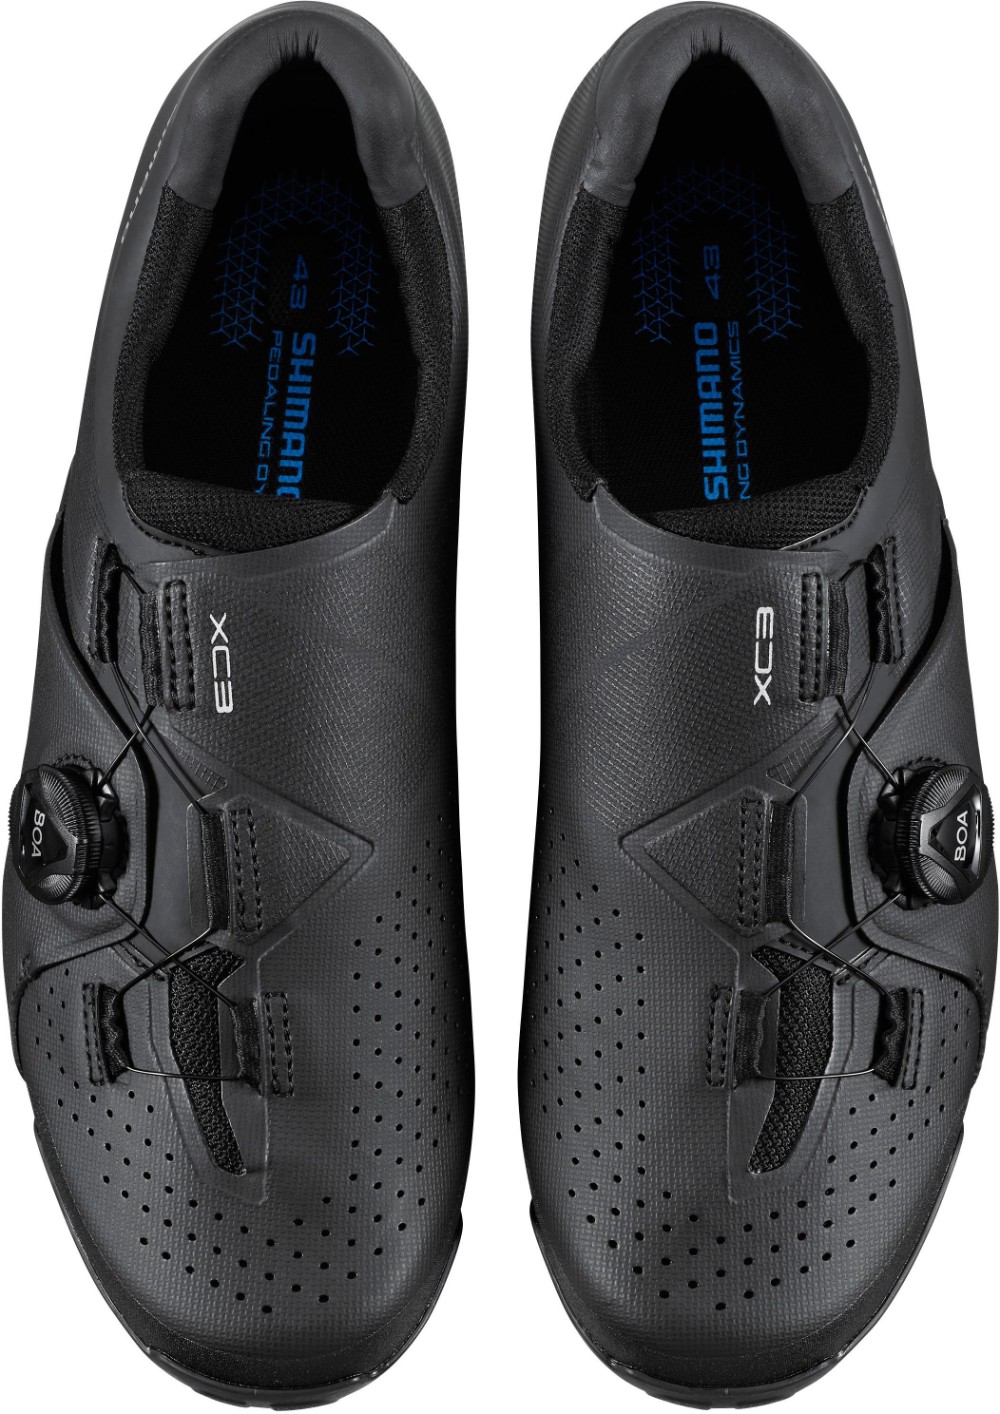 XC3 (XC300) Widefit Cross Country MTB Cycling Shoes image 1